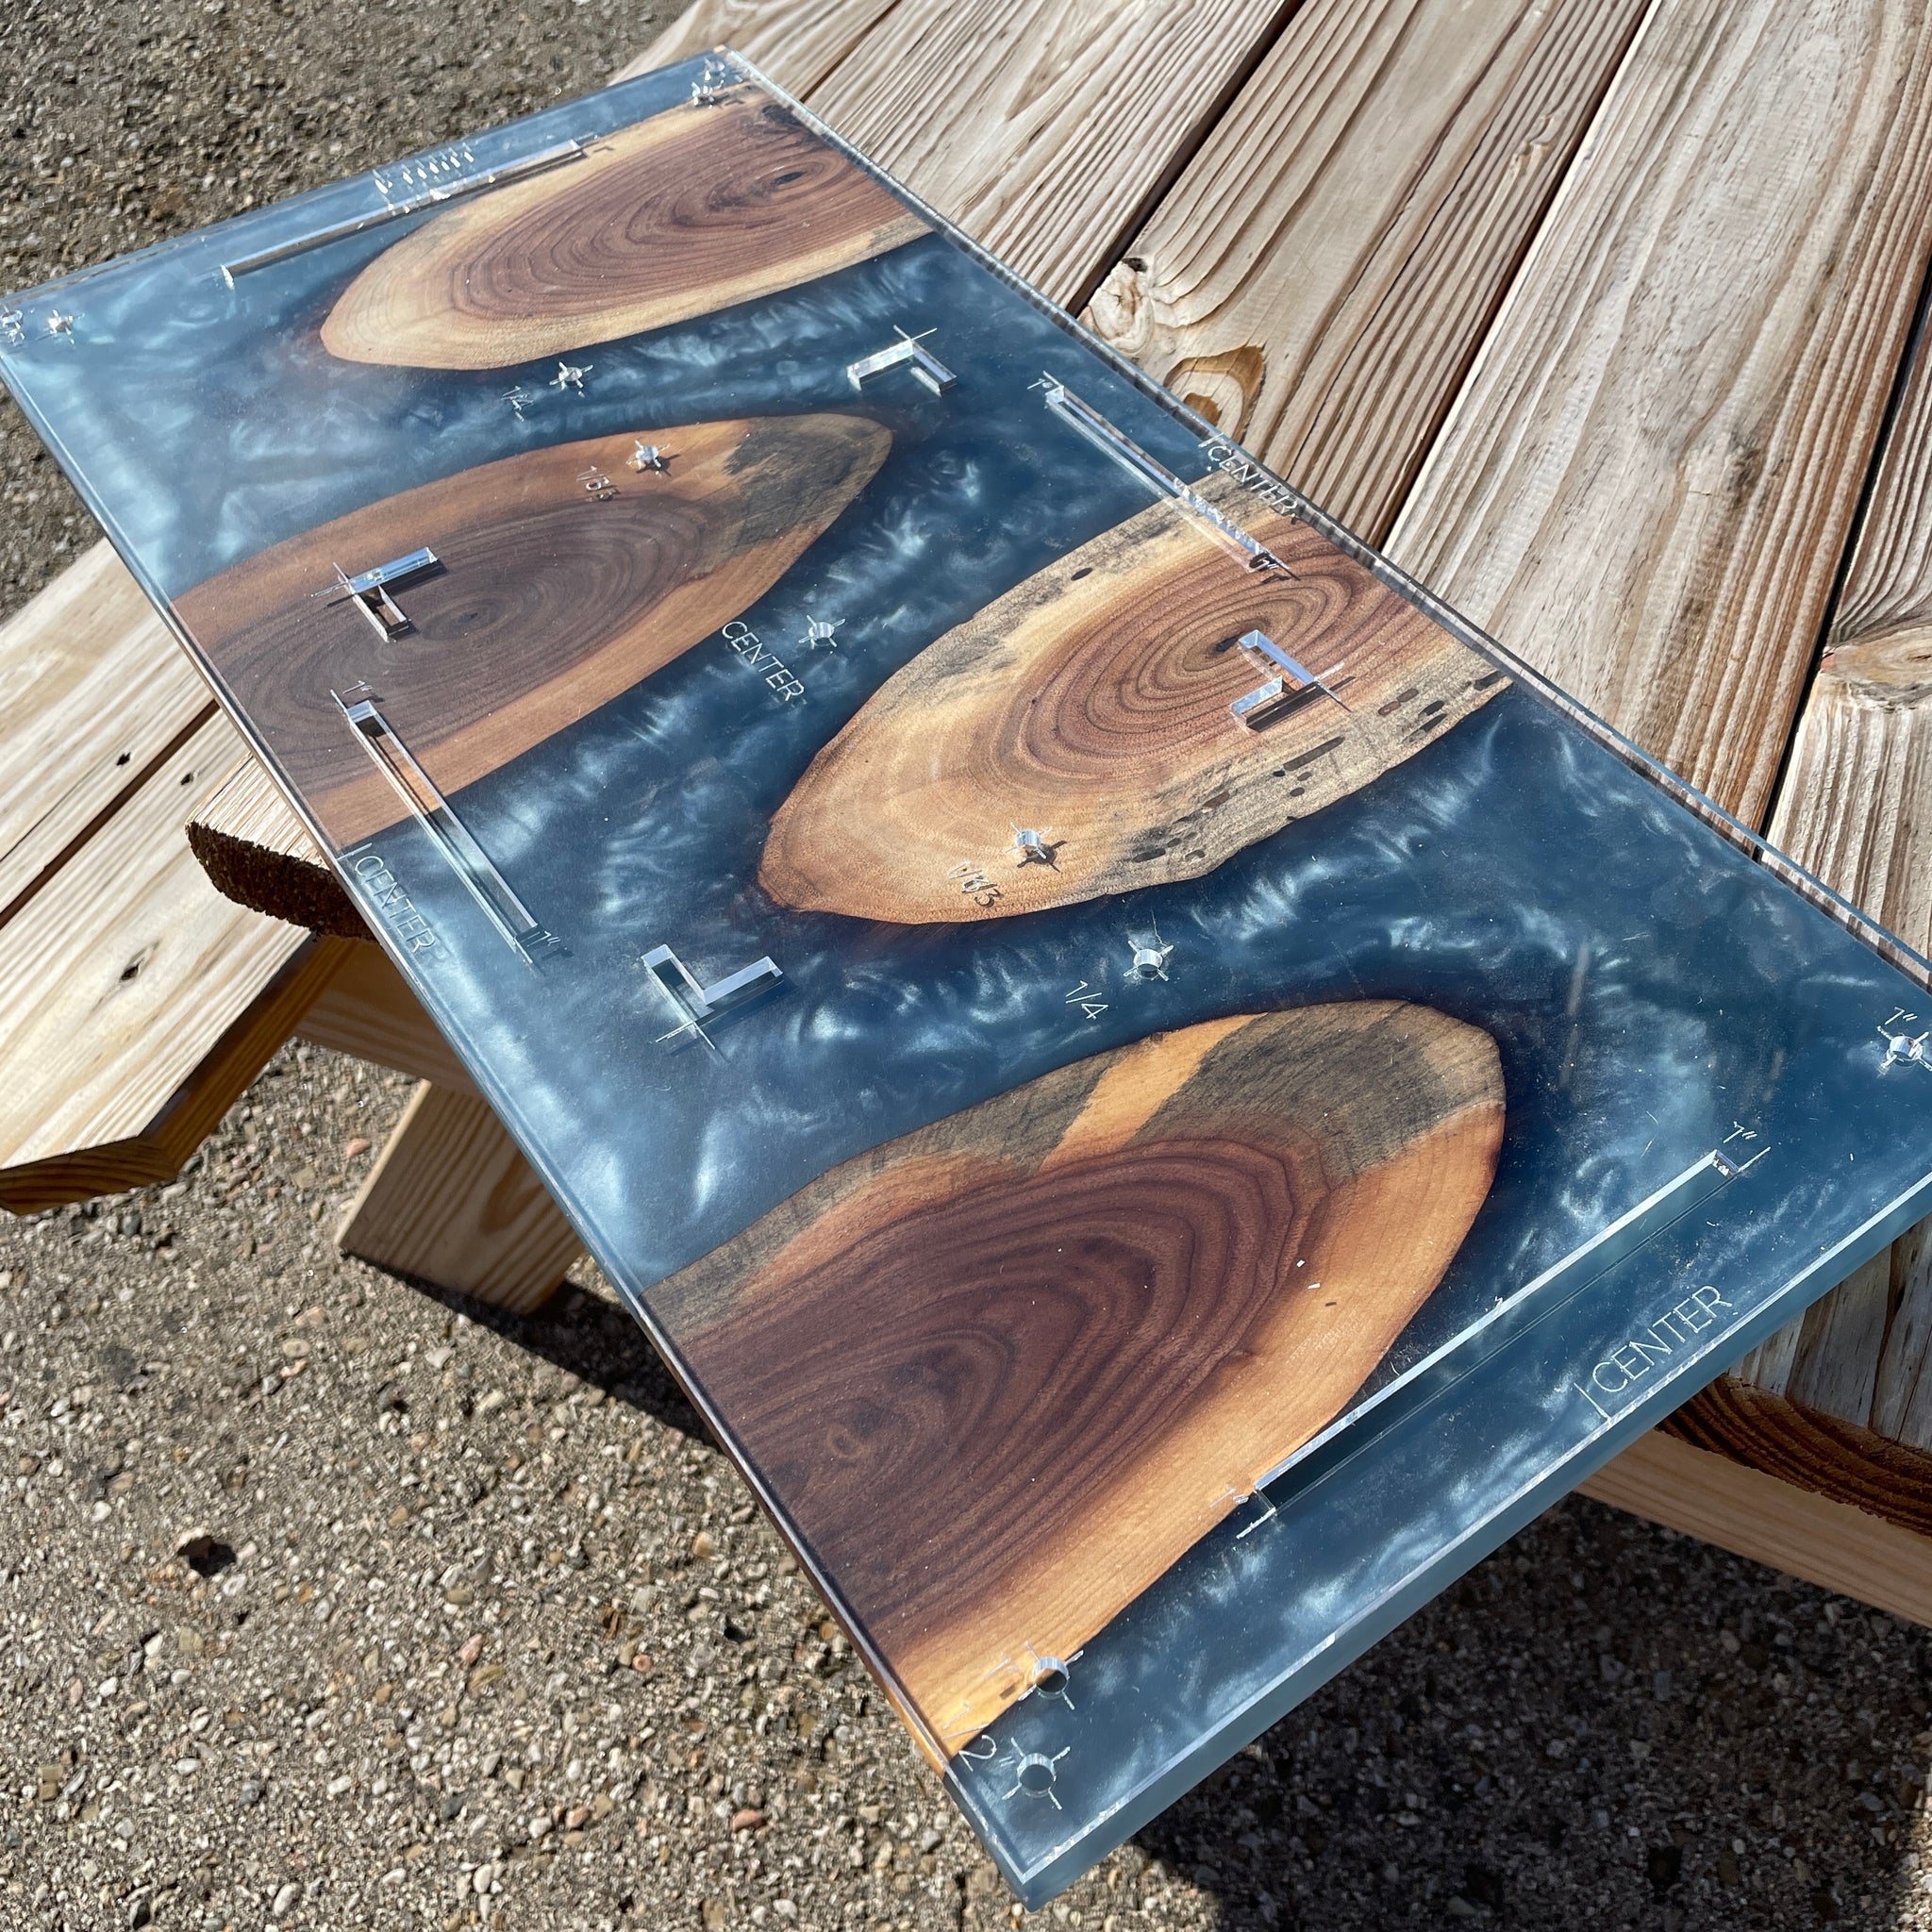 The Beginners Guide To Router Templates For Epoxy & Wood Projects